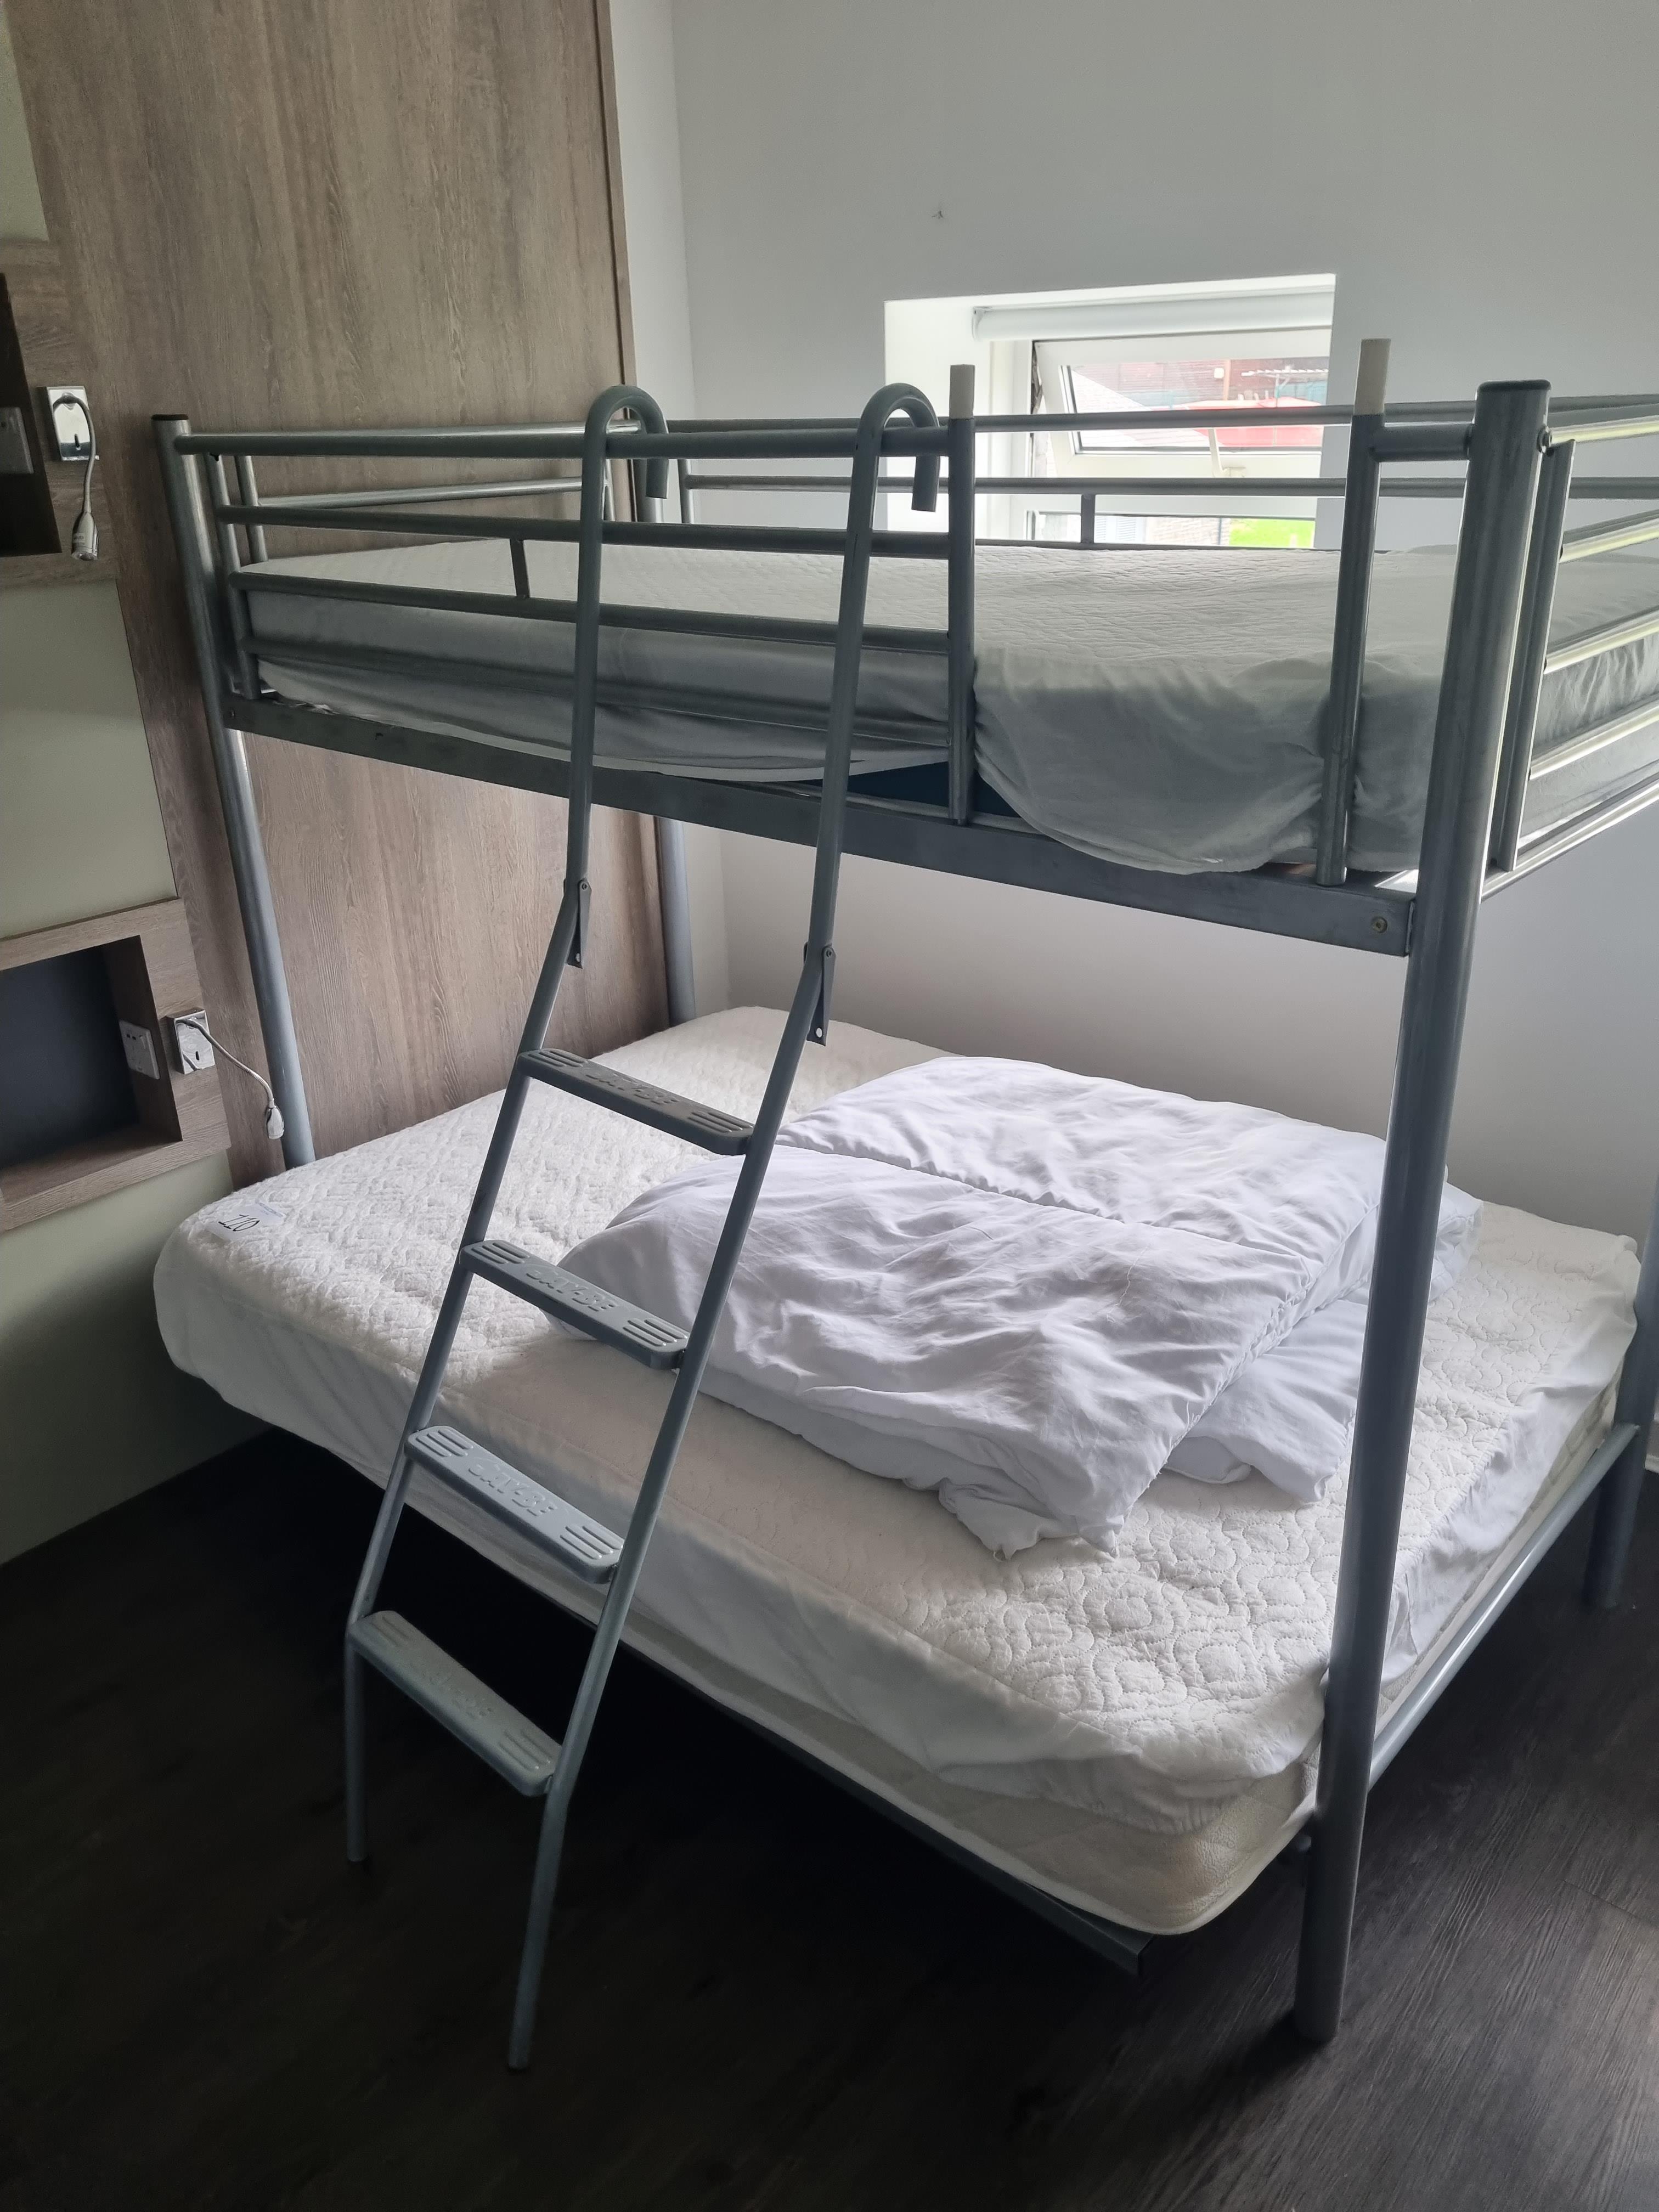 A Jay-Be Family Triple Bunk Bed In Silver With Double At Bottom And Single On Top W 1350mm L - Image 2 of 2